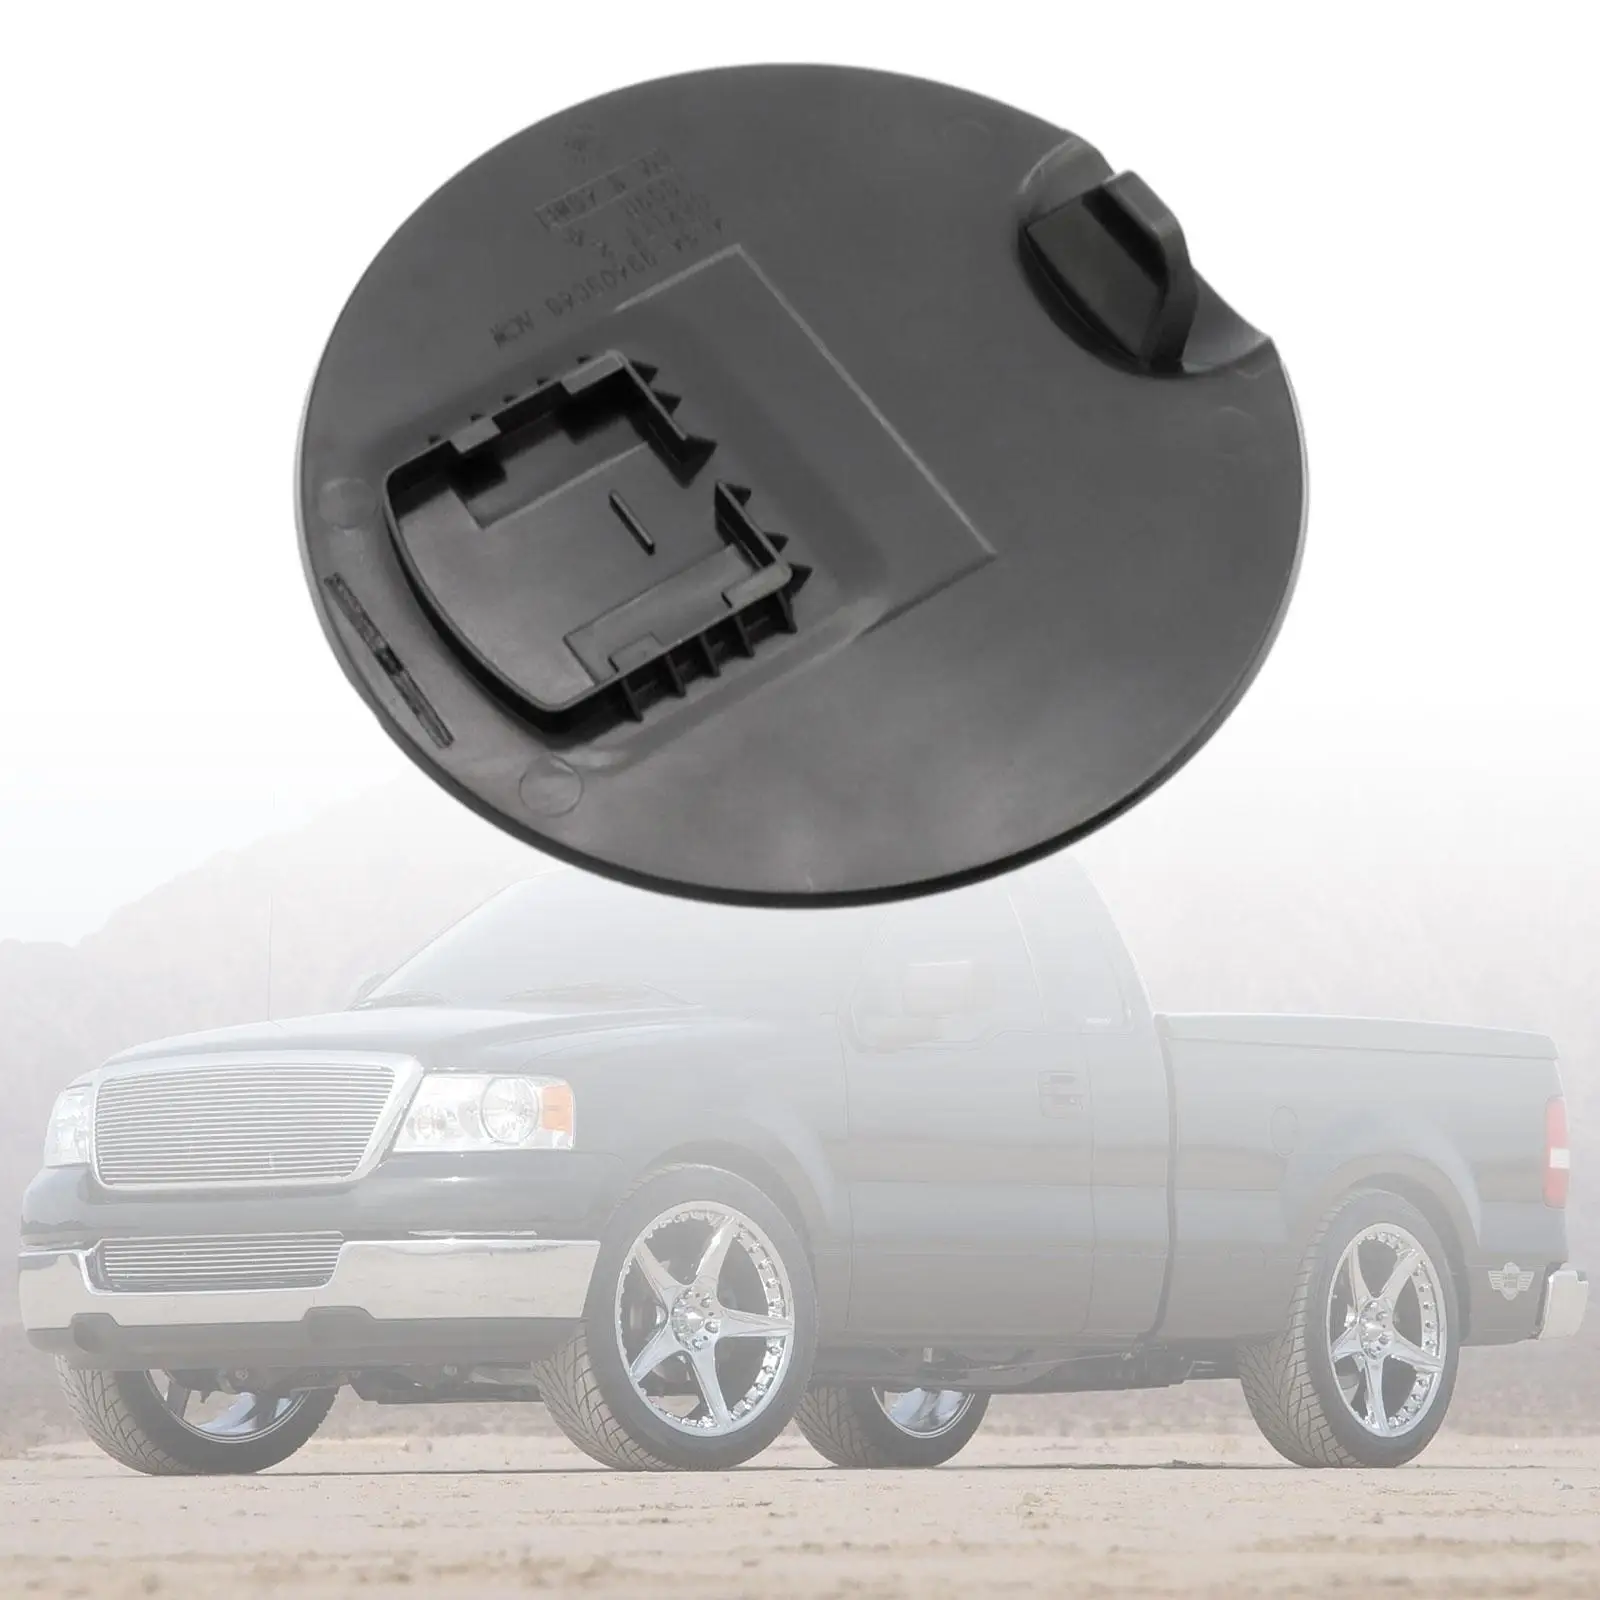 Gas Tank Door Cover 4L3Z-99405A26-eaa High Performance Directly Replace for Lincoln Mark LT 2006-2008 Accessories